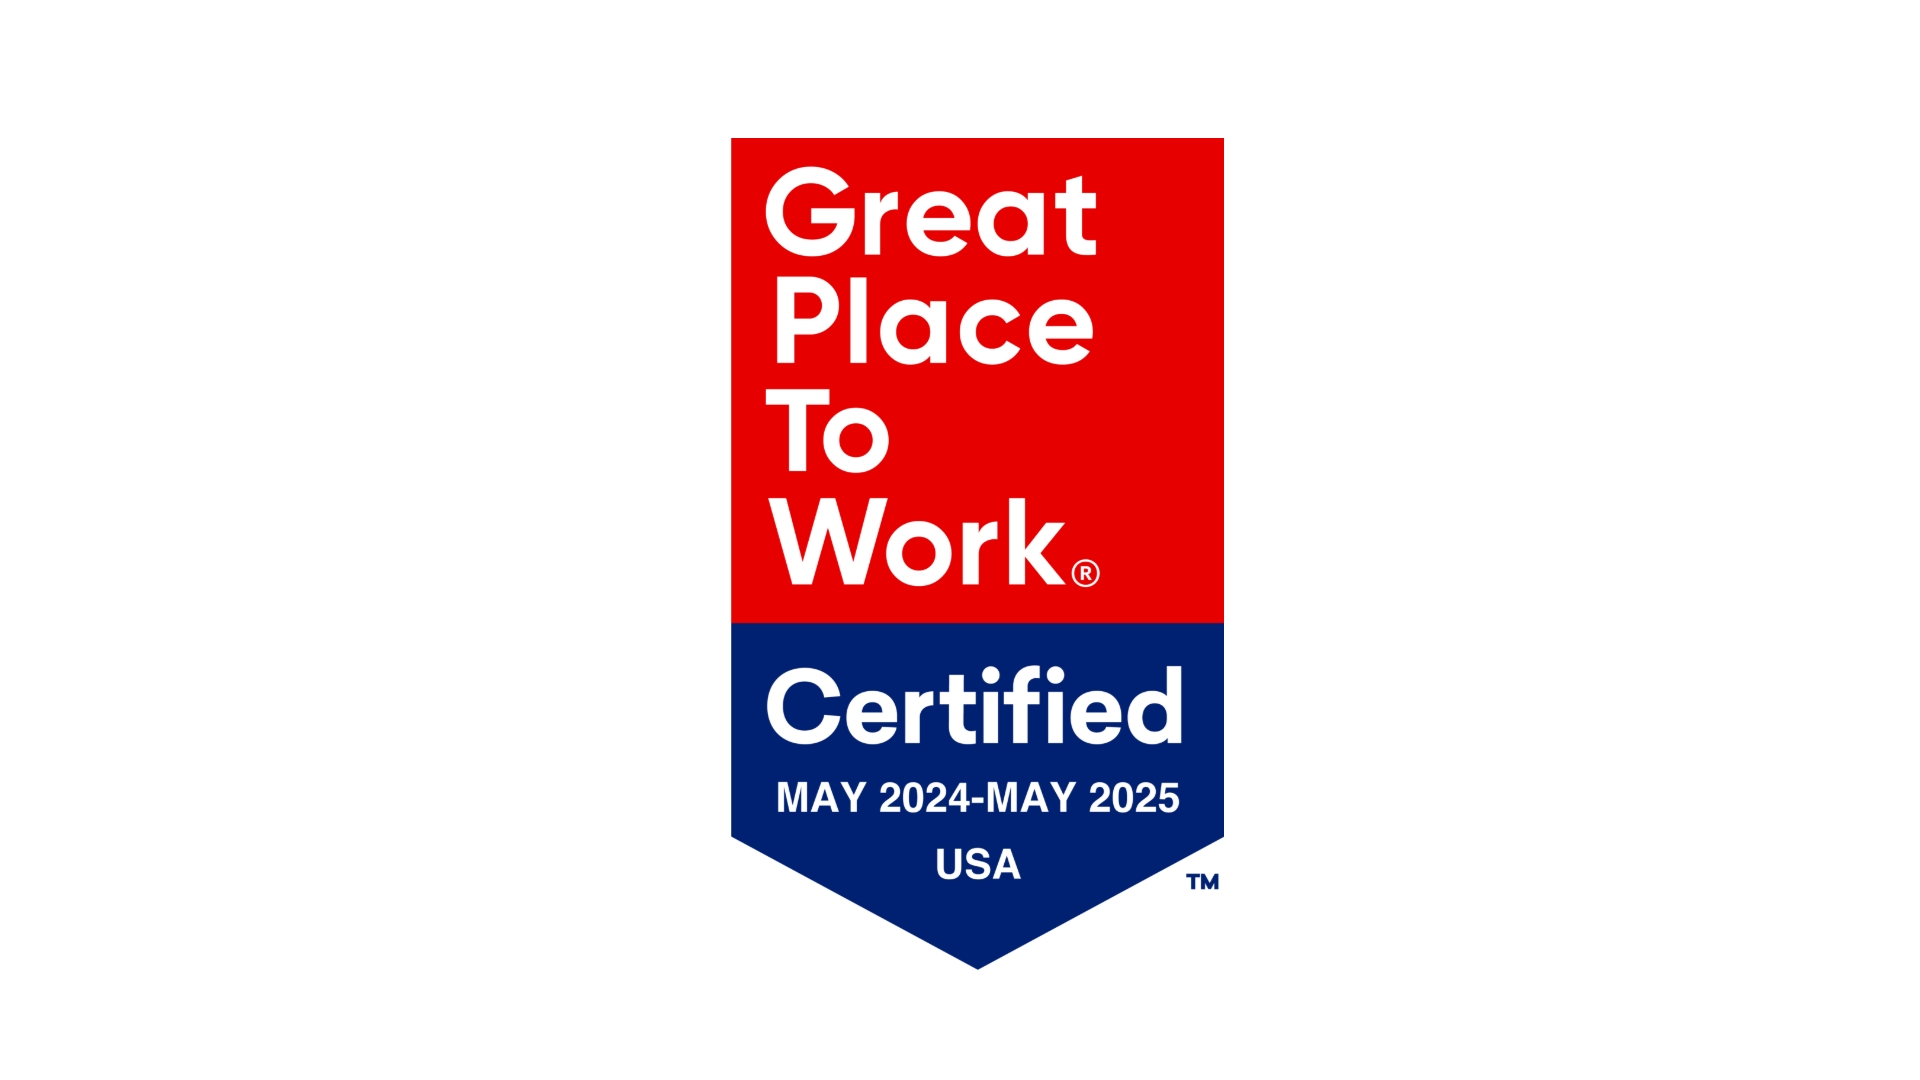 Transforming Age Network Awarded the Great Place To Work® Certification